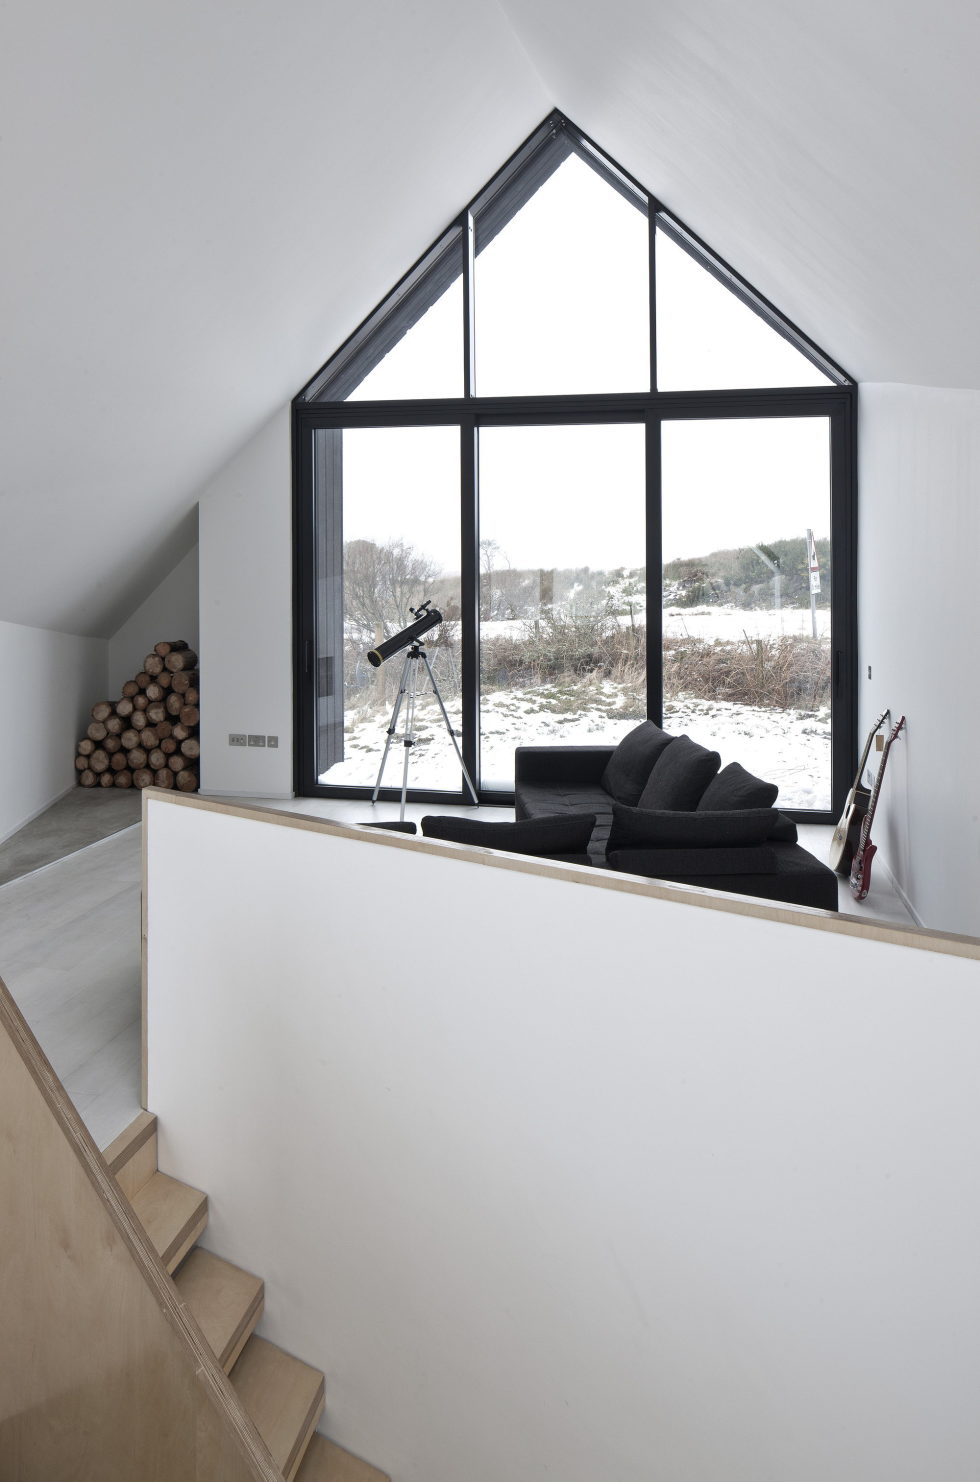 The house in Scotland from the Raw Architecture Workshop studio 8